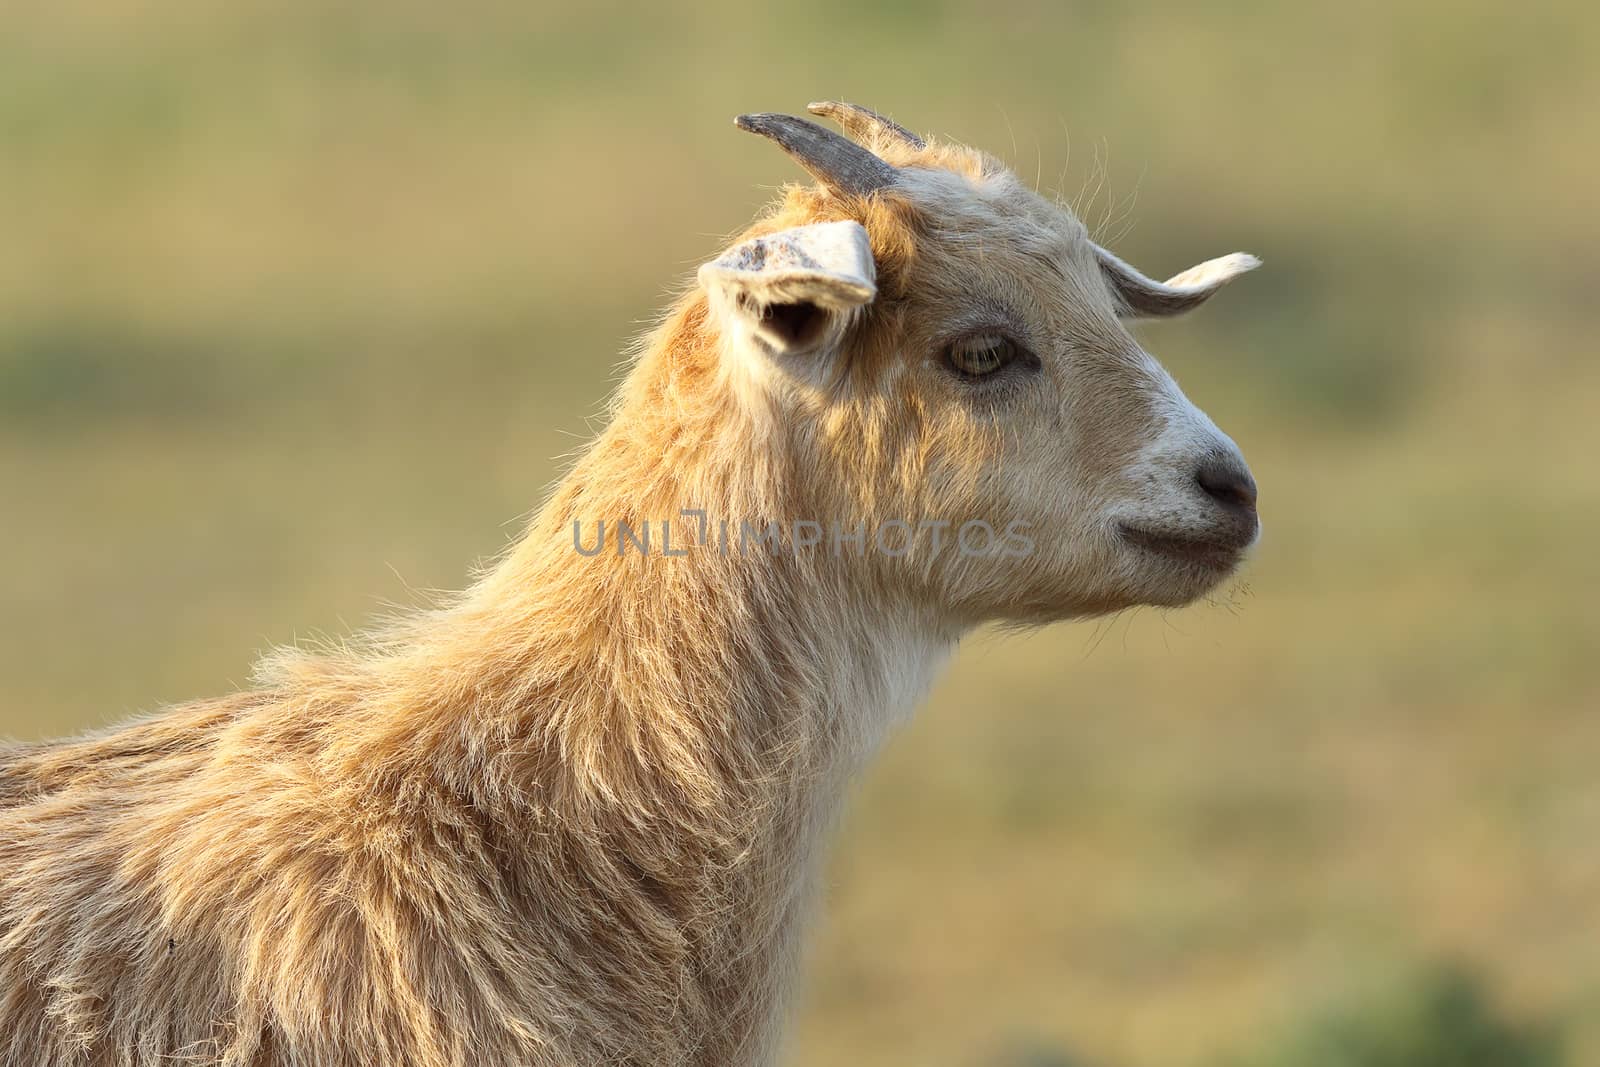 young cute goat portrait over out of focus background